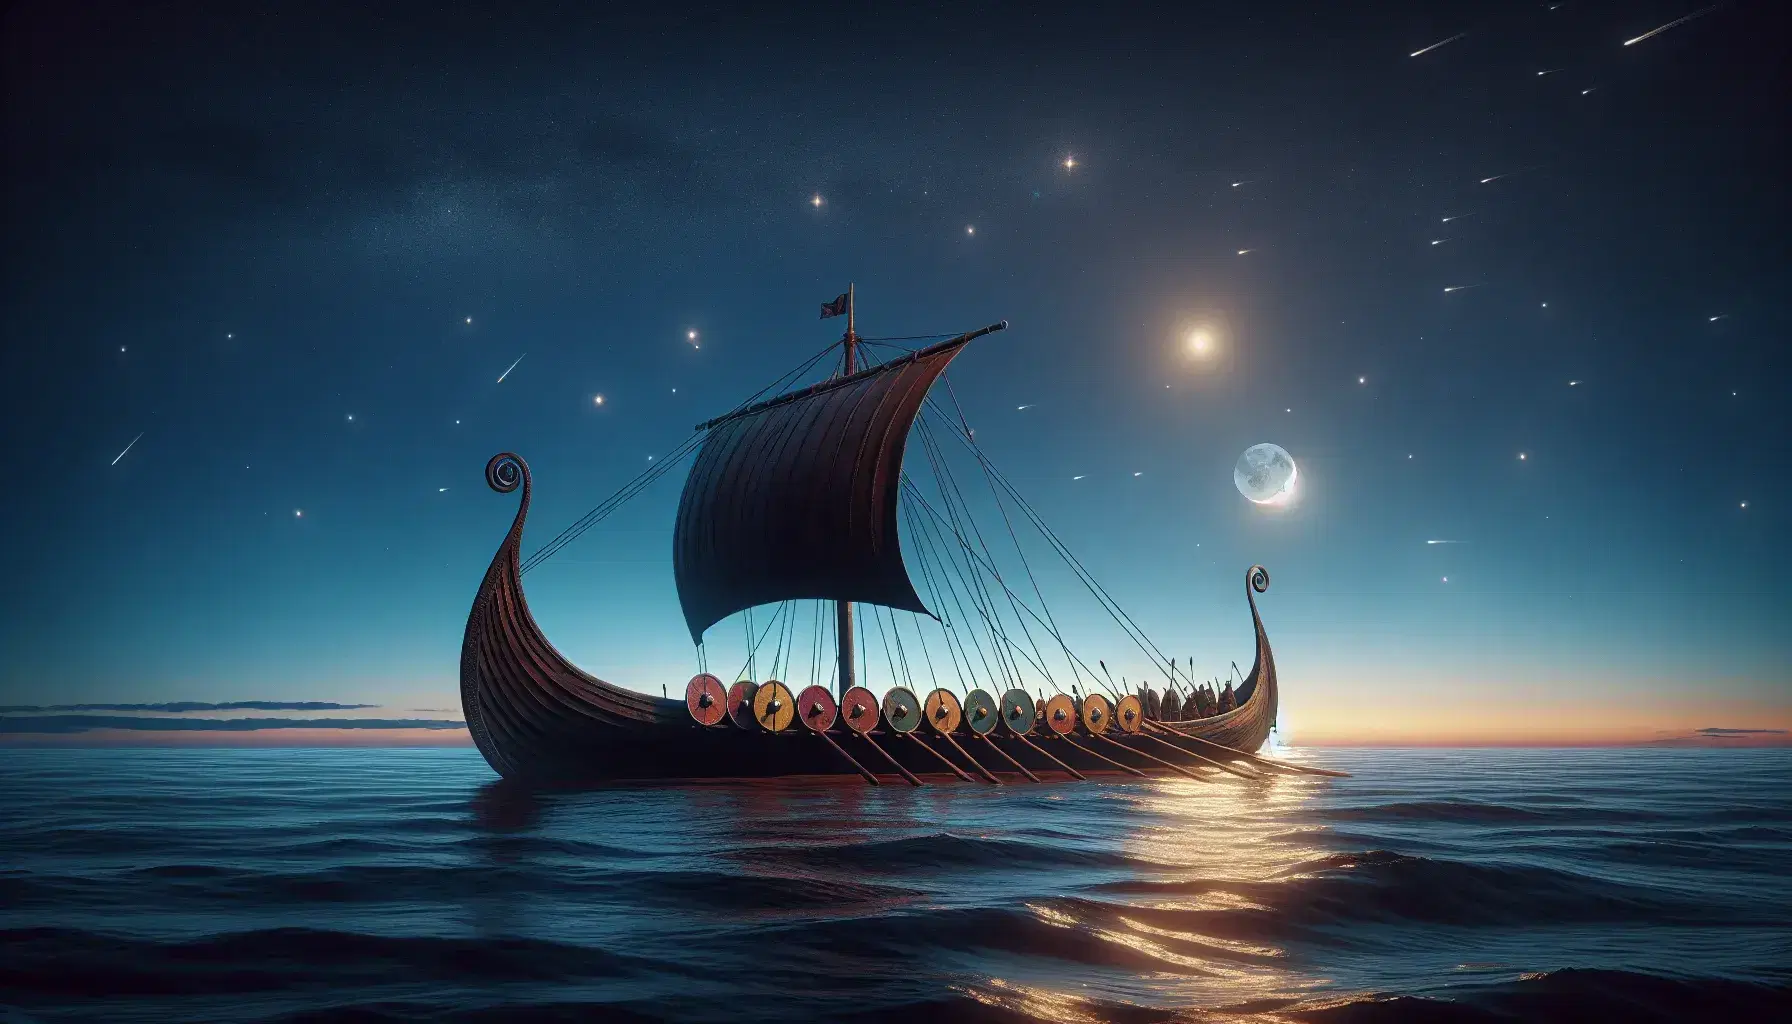 Viking longship at twilight with crescent moon, starry sky, and reflective sea, featuring shield-lined hull, billowing sail, and navigators at work.